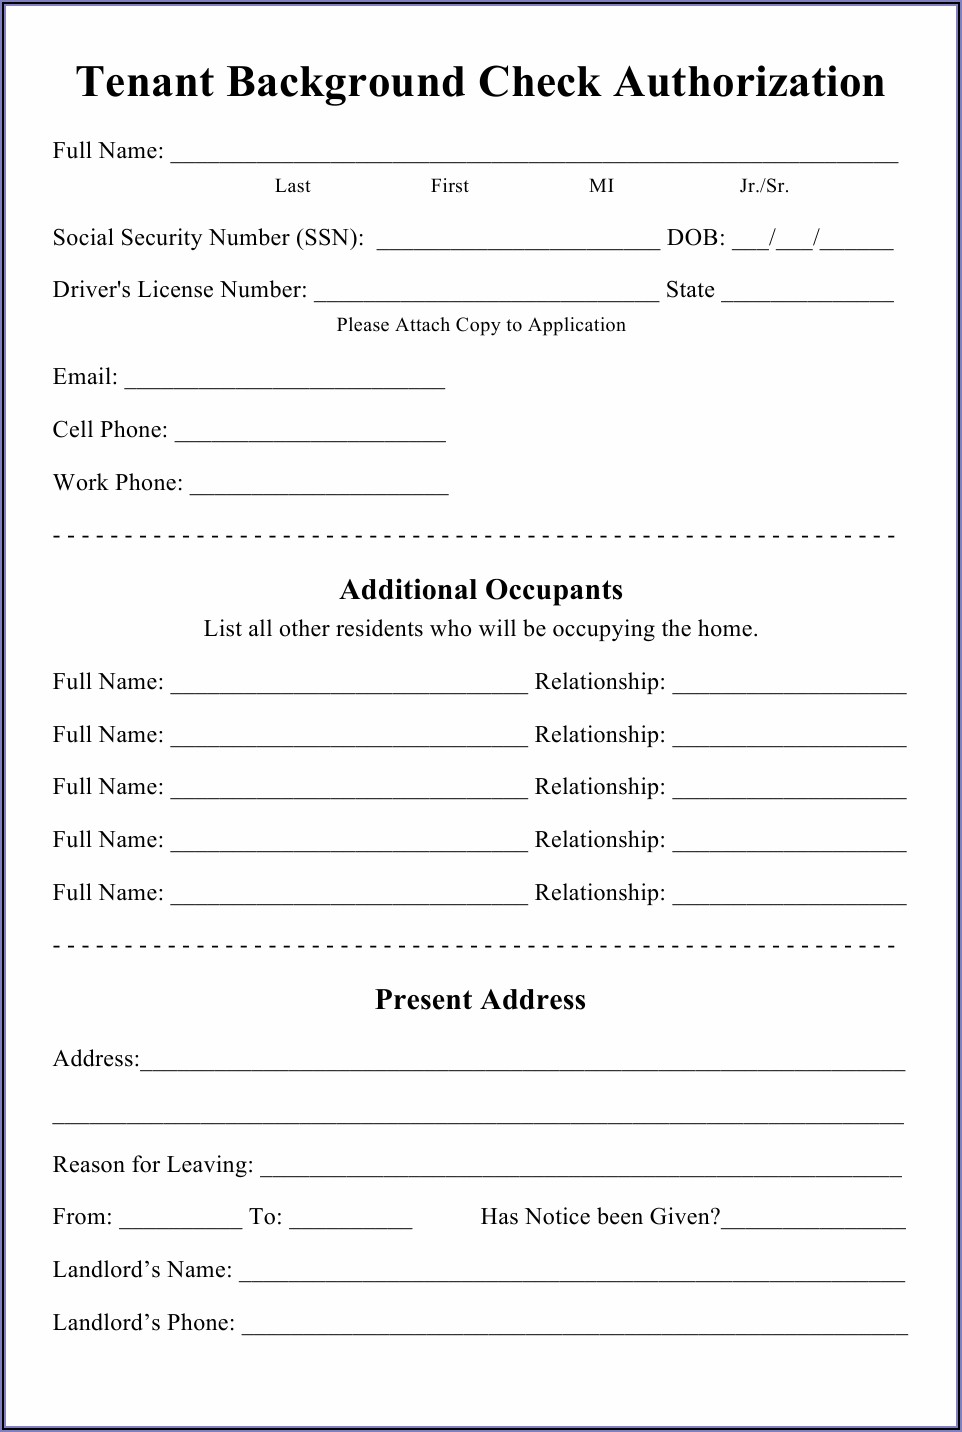 Printable Tenant Background Check Form